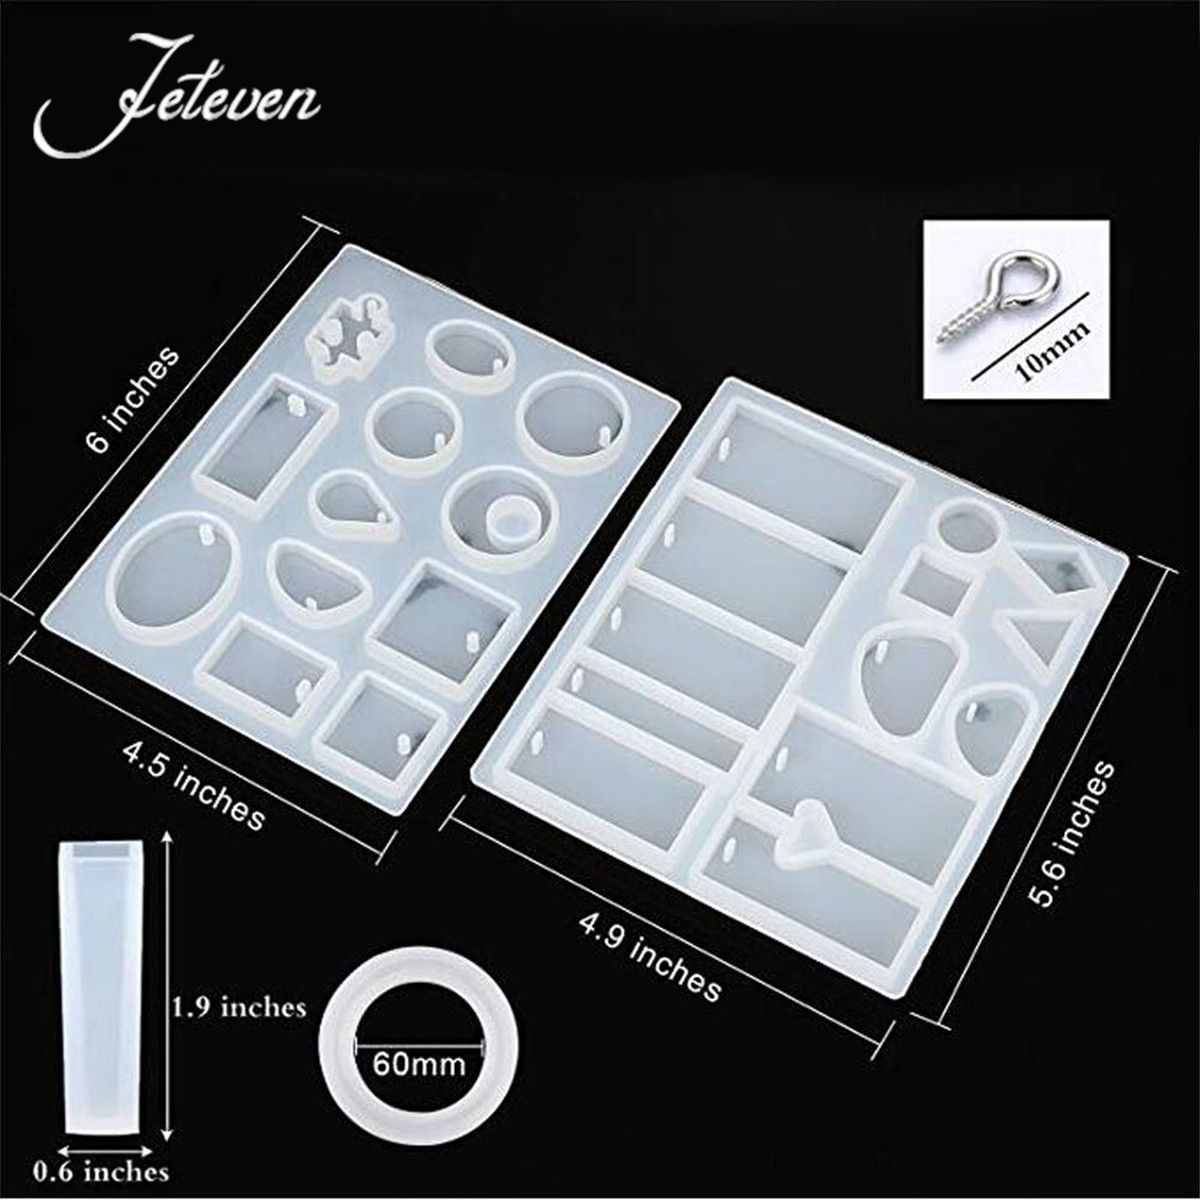 213pcs-Resin-Casting-Mold-Kit-Silicone-For-Necklace-DIY-Jewelry-Pendant-Craft-Making-Gadget-1409949